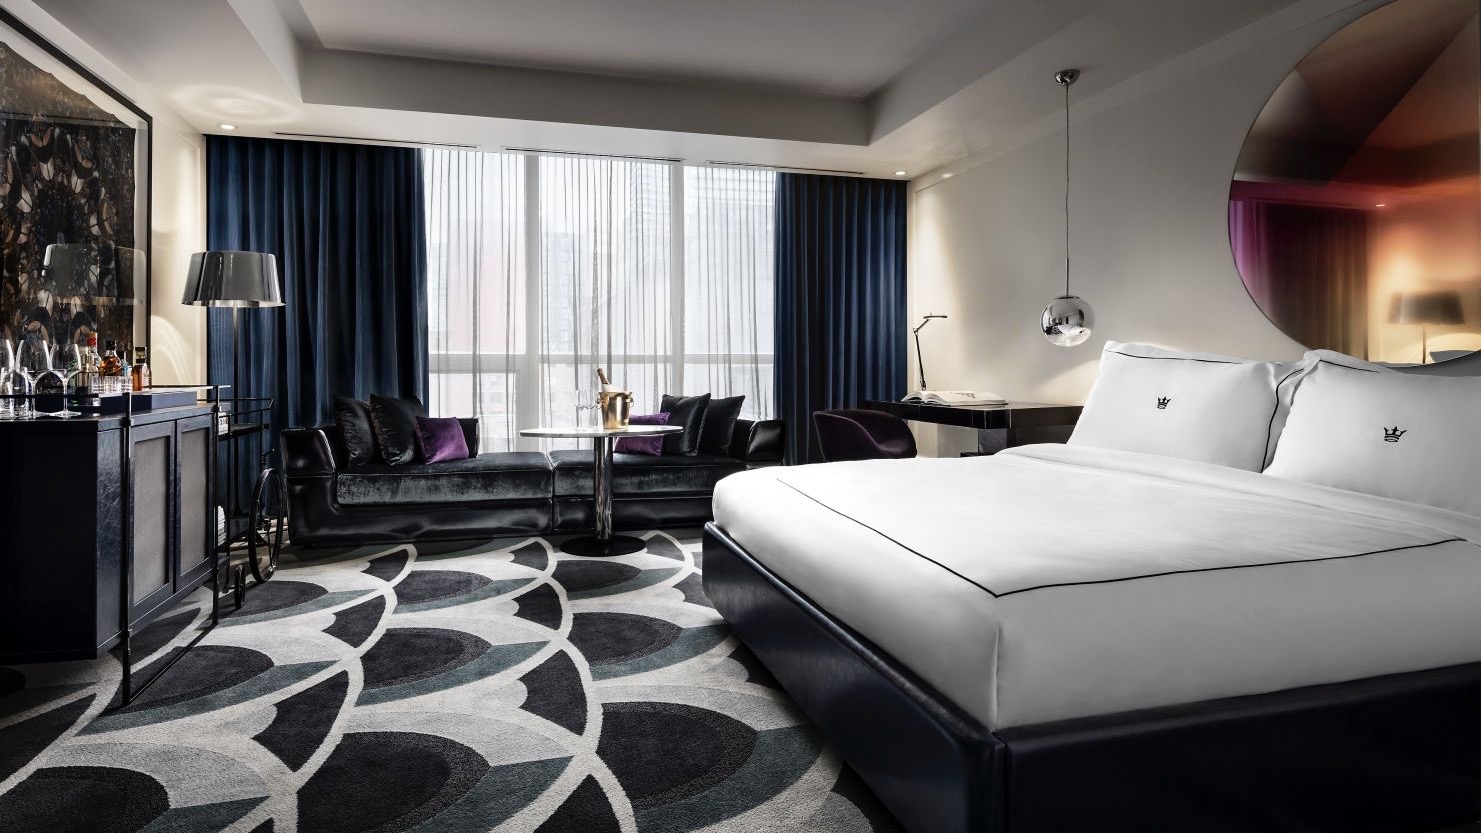 Bisha Hotel & Residences luxury hotels in Toronto black and white bedroom